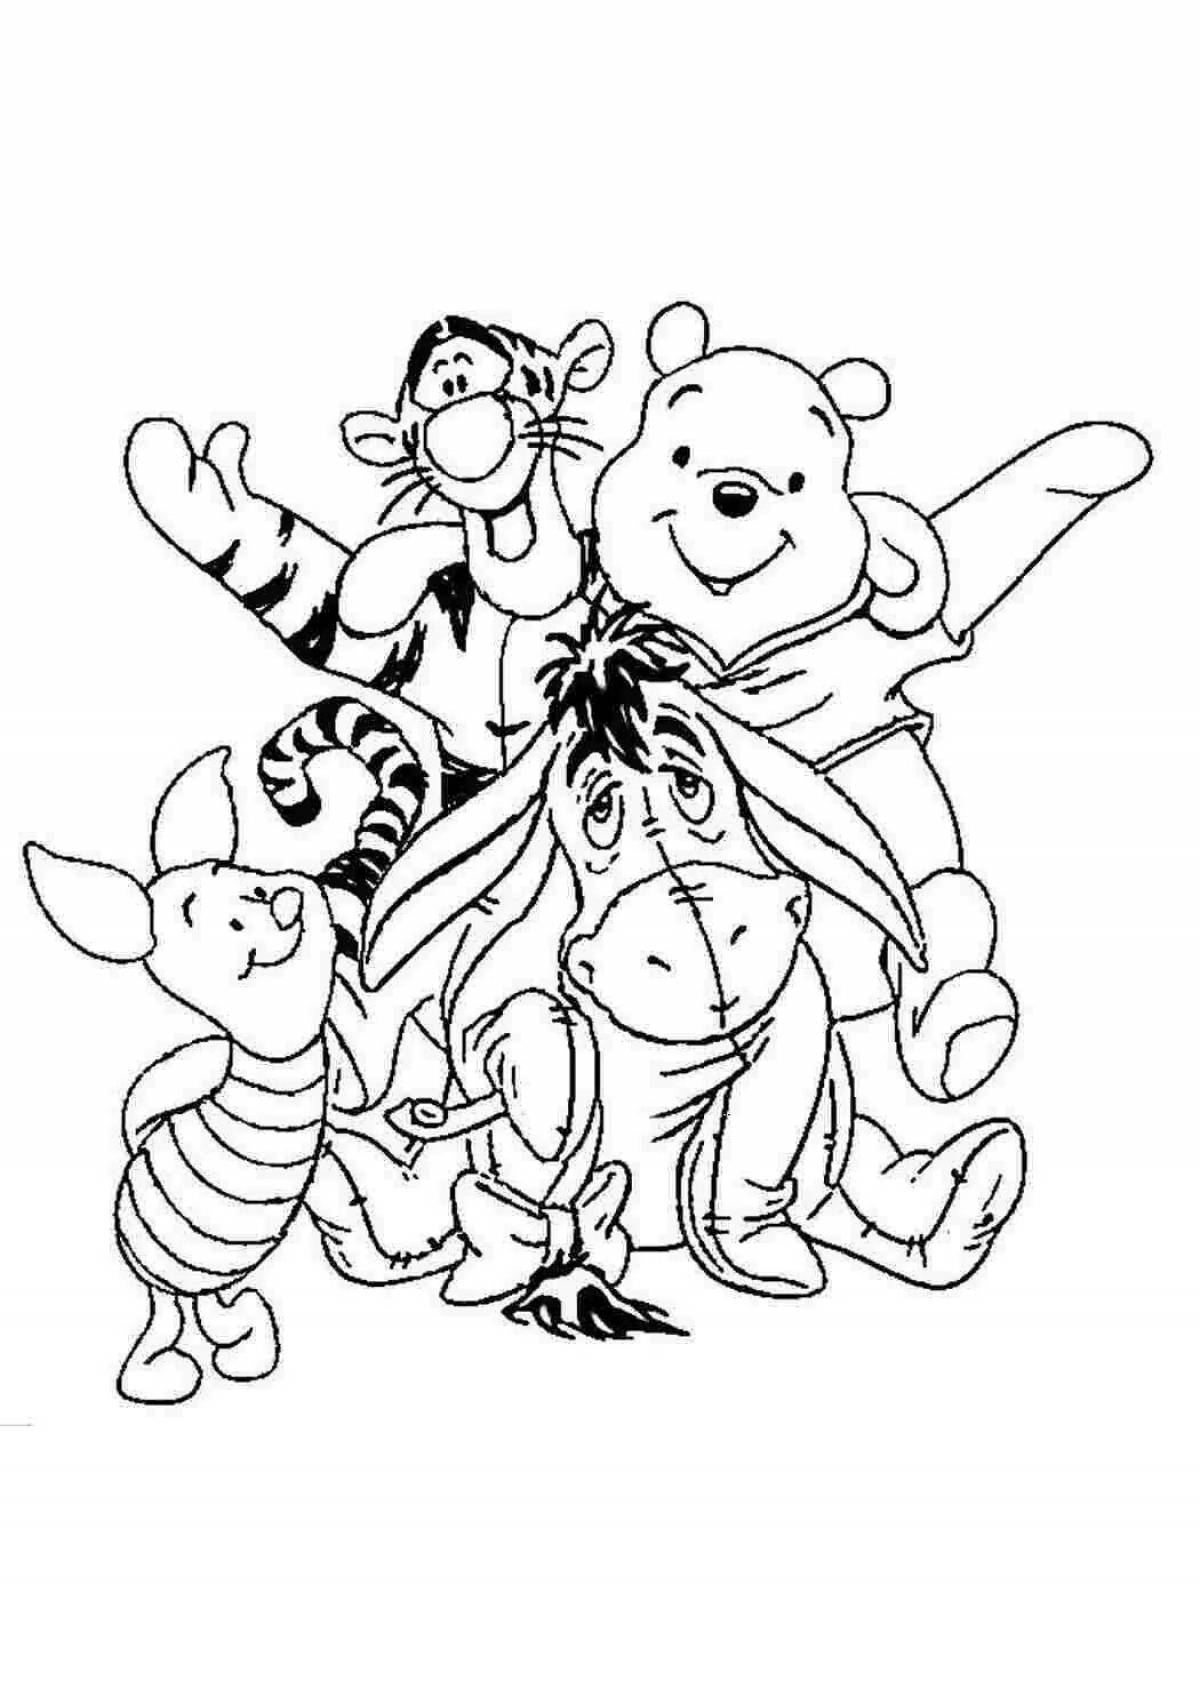 Winnie the pooh and his friends #3